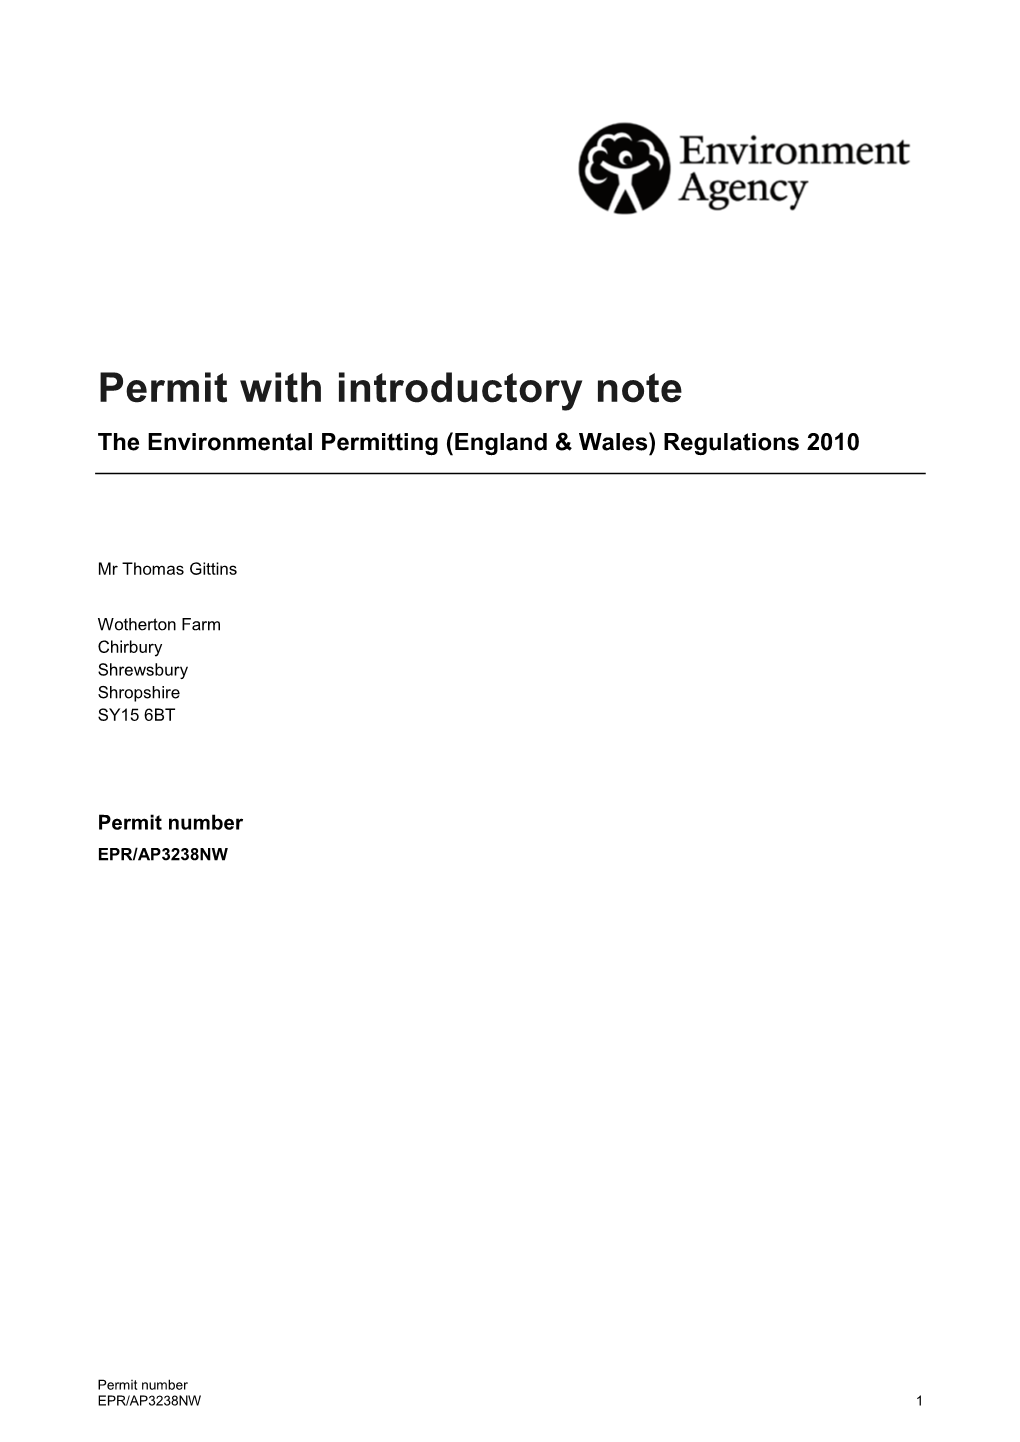 Permit with Introductory Note the Environmental Permitting (England & Wales) Regulations 2010